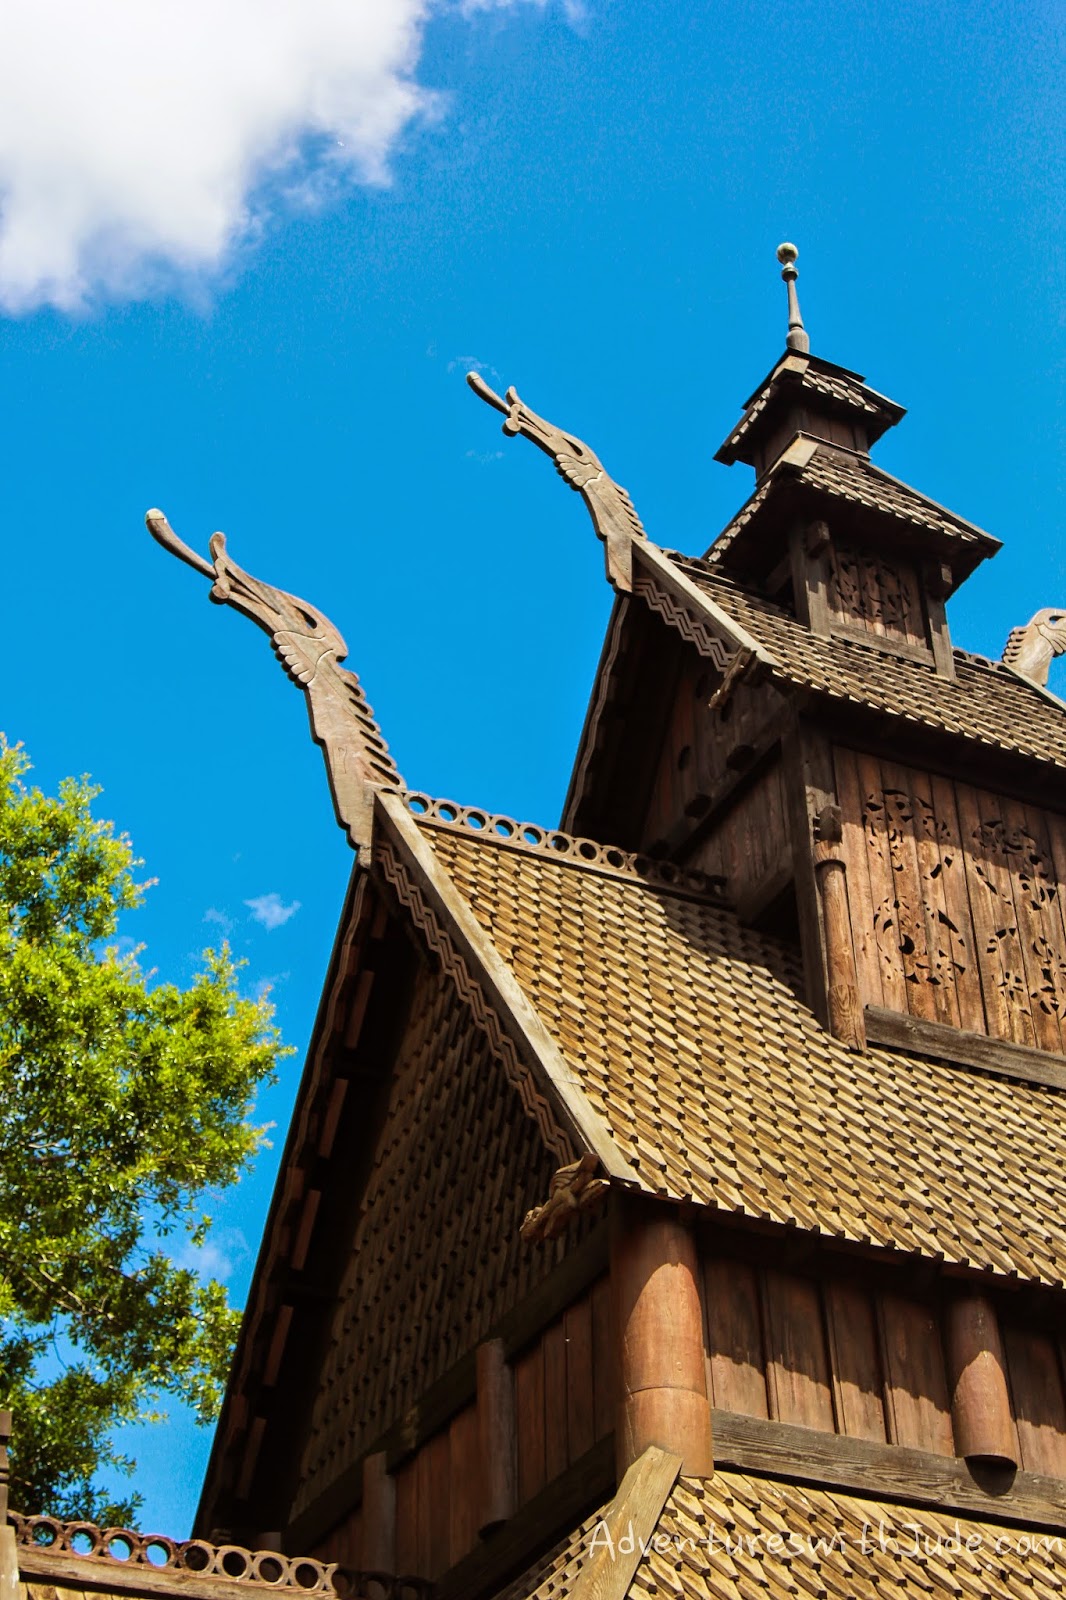 Viking prowls on Stave Church roof